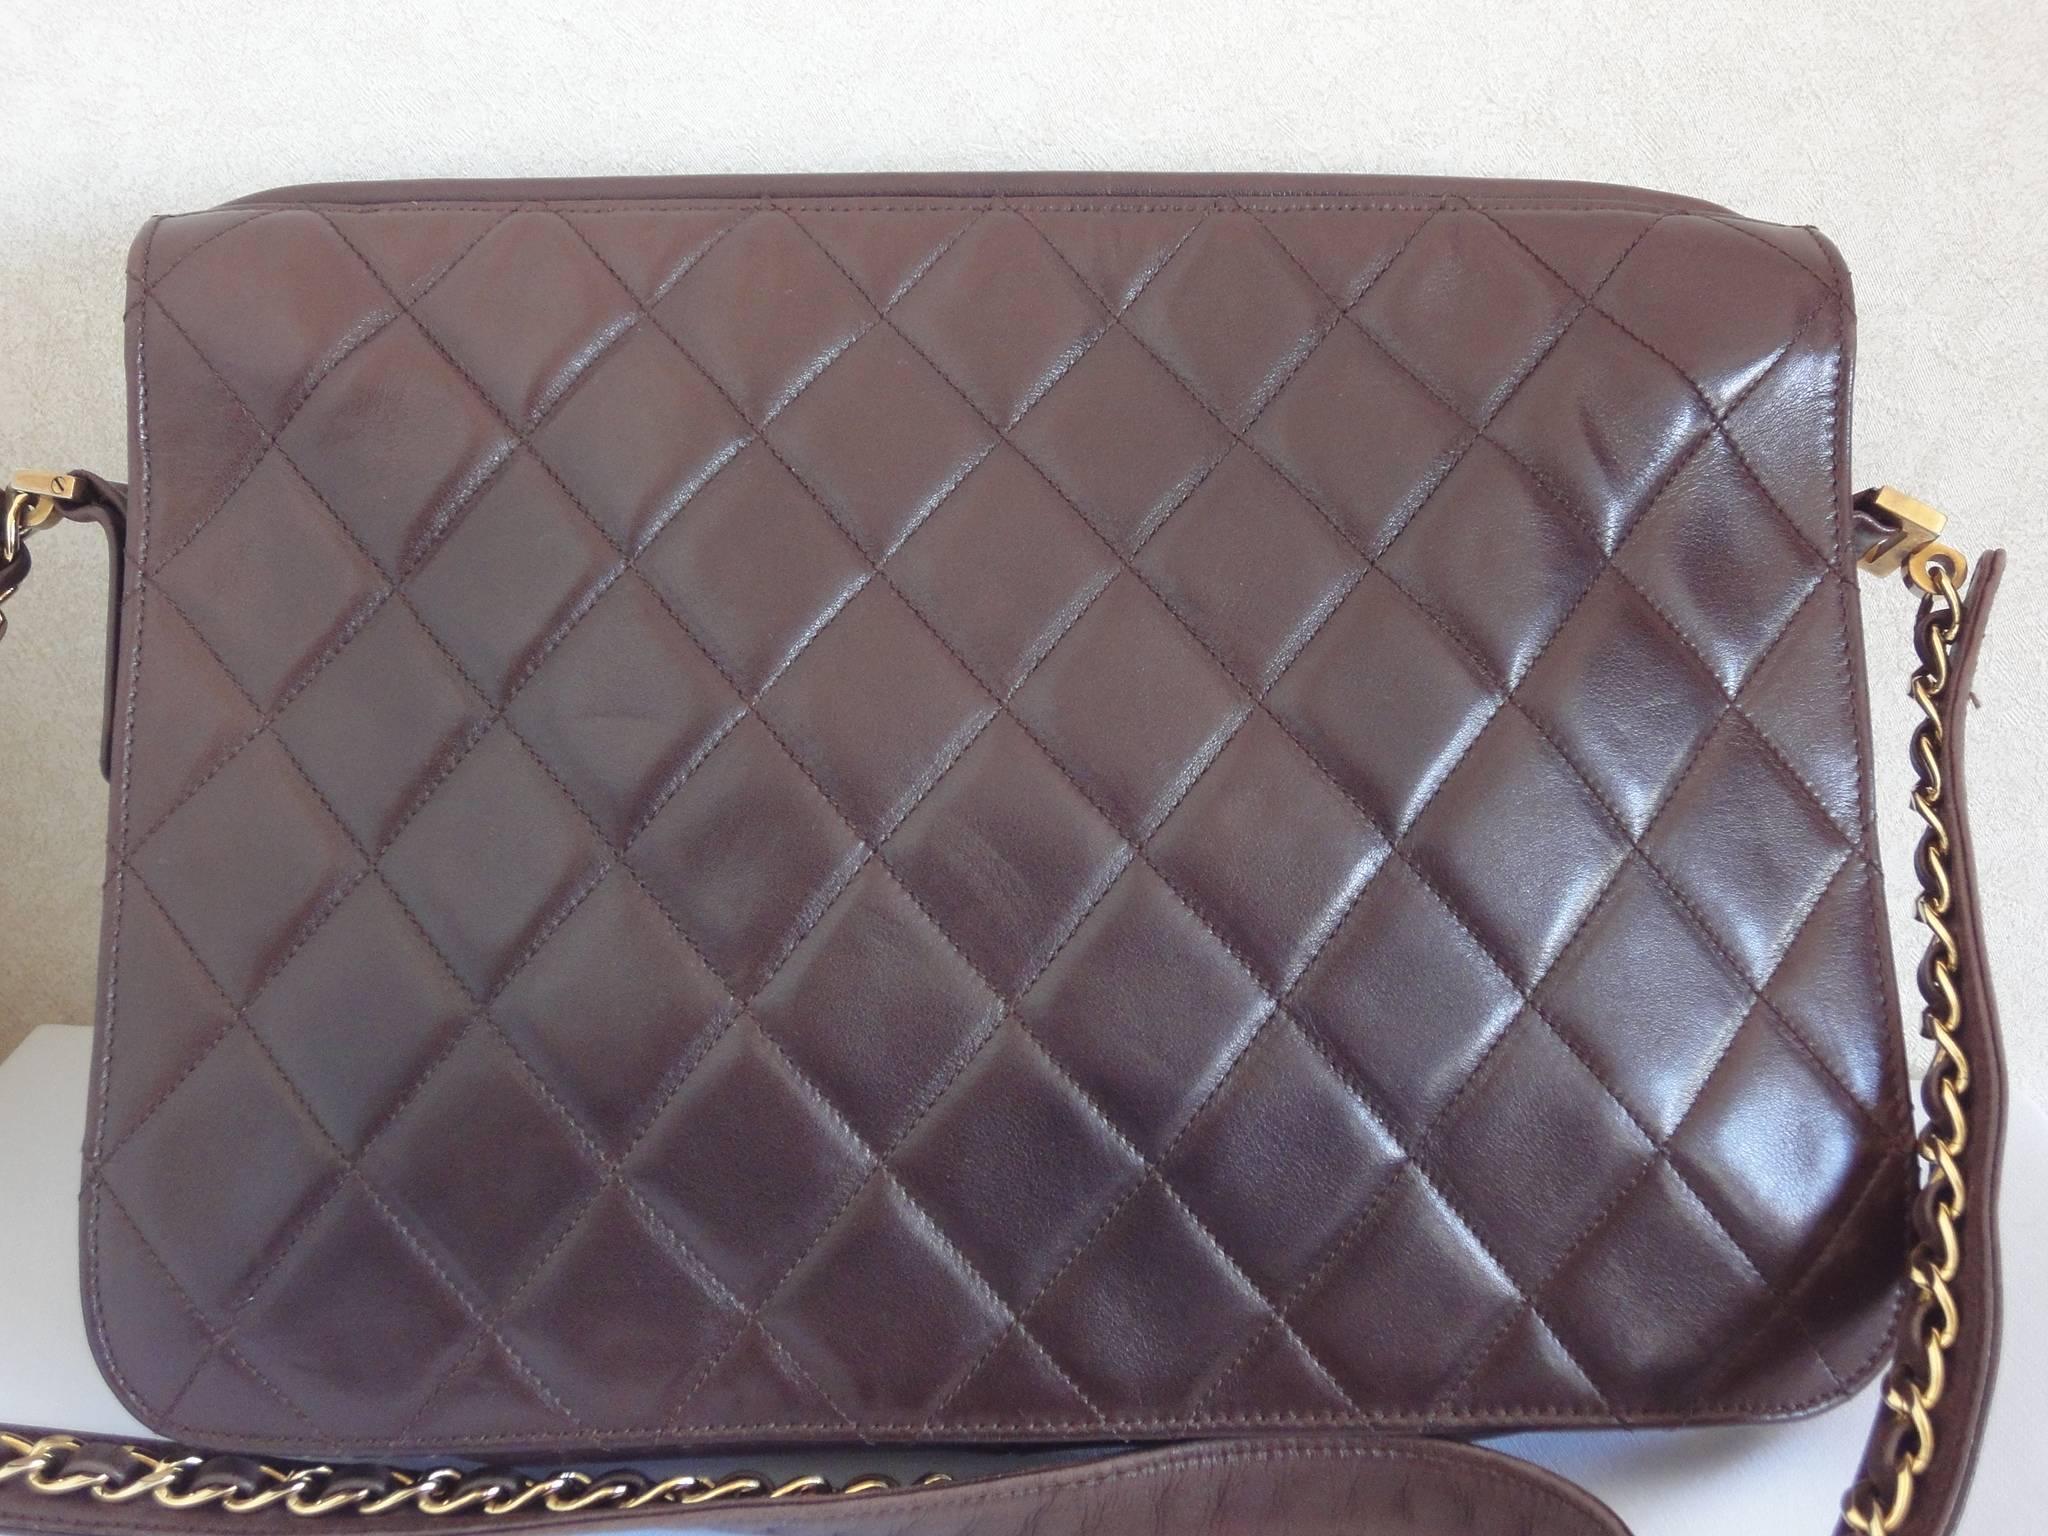 80's vintage Chanel dark brown quilted lambskin shoulder bag with CC motif and built-in chain shoulder strap. Rare Chanel purse.

Introducing one-of-a-kind vintage purse from Chanel in the 80s. 
Darkbrown lambskin square purse with gold tone CC